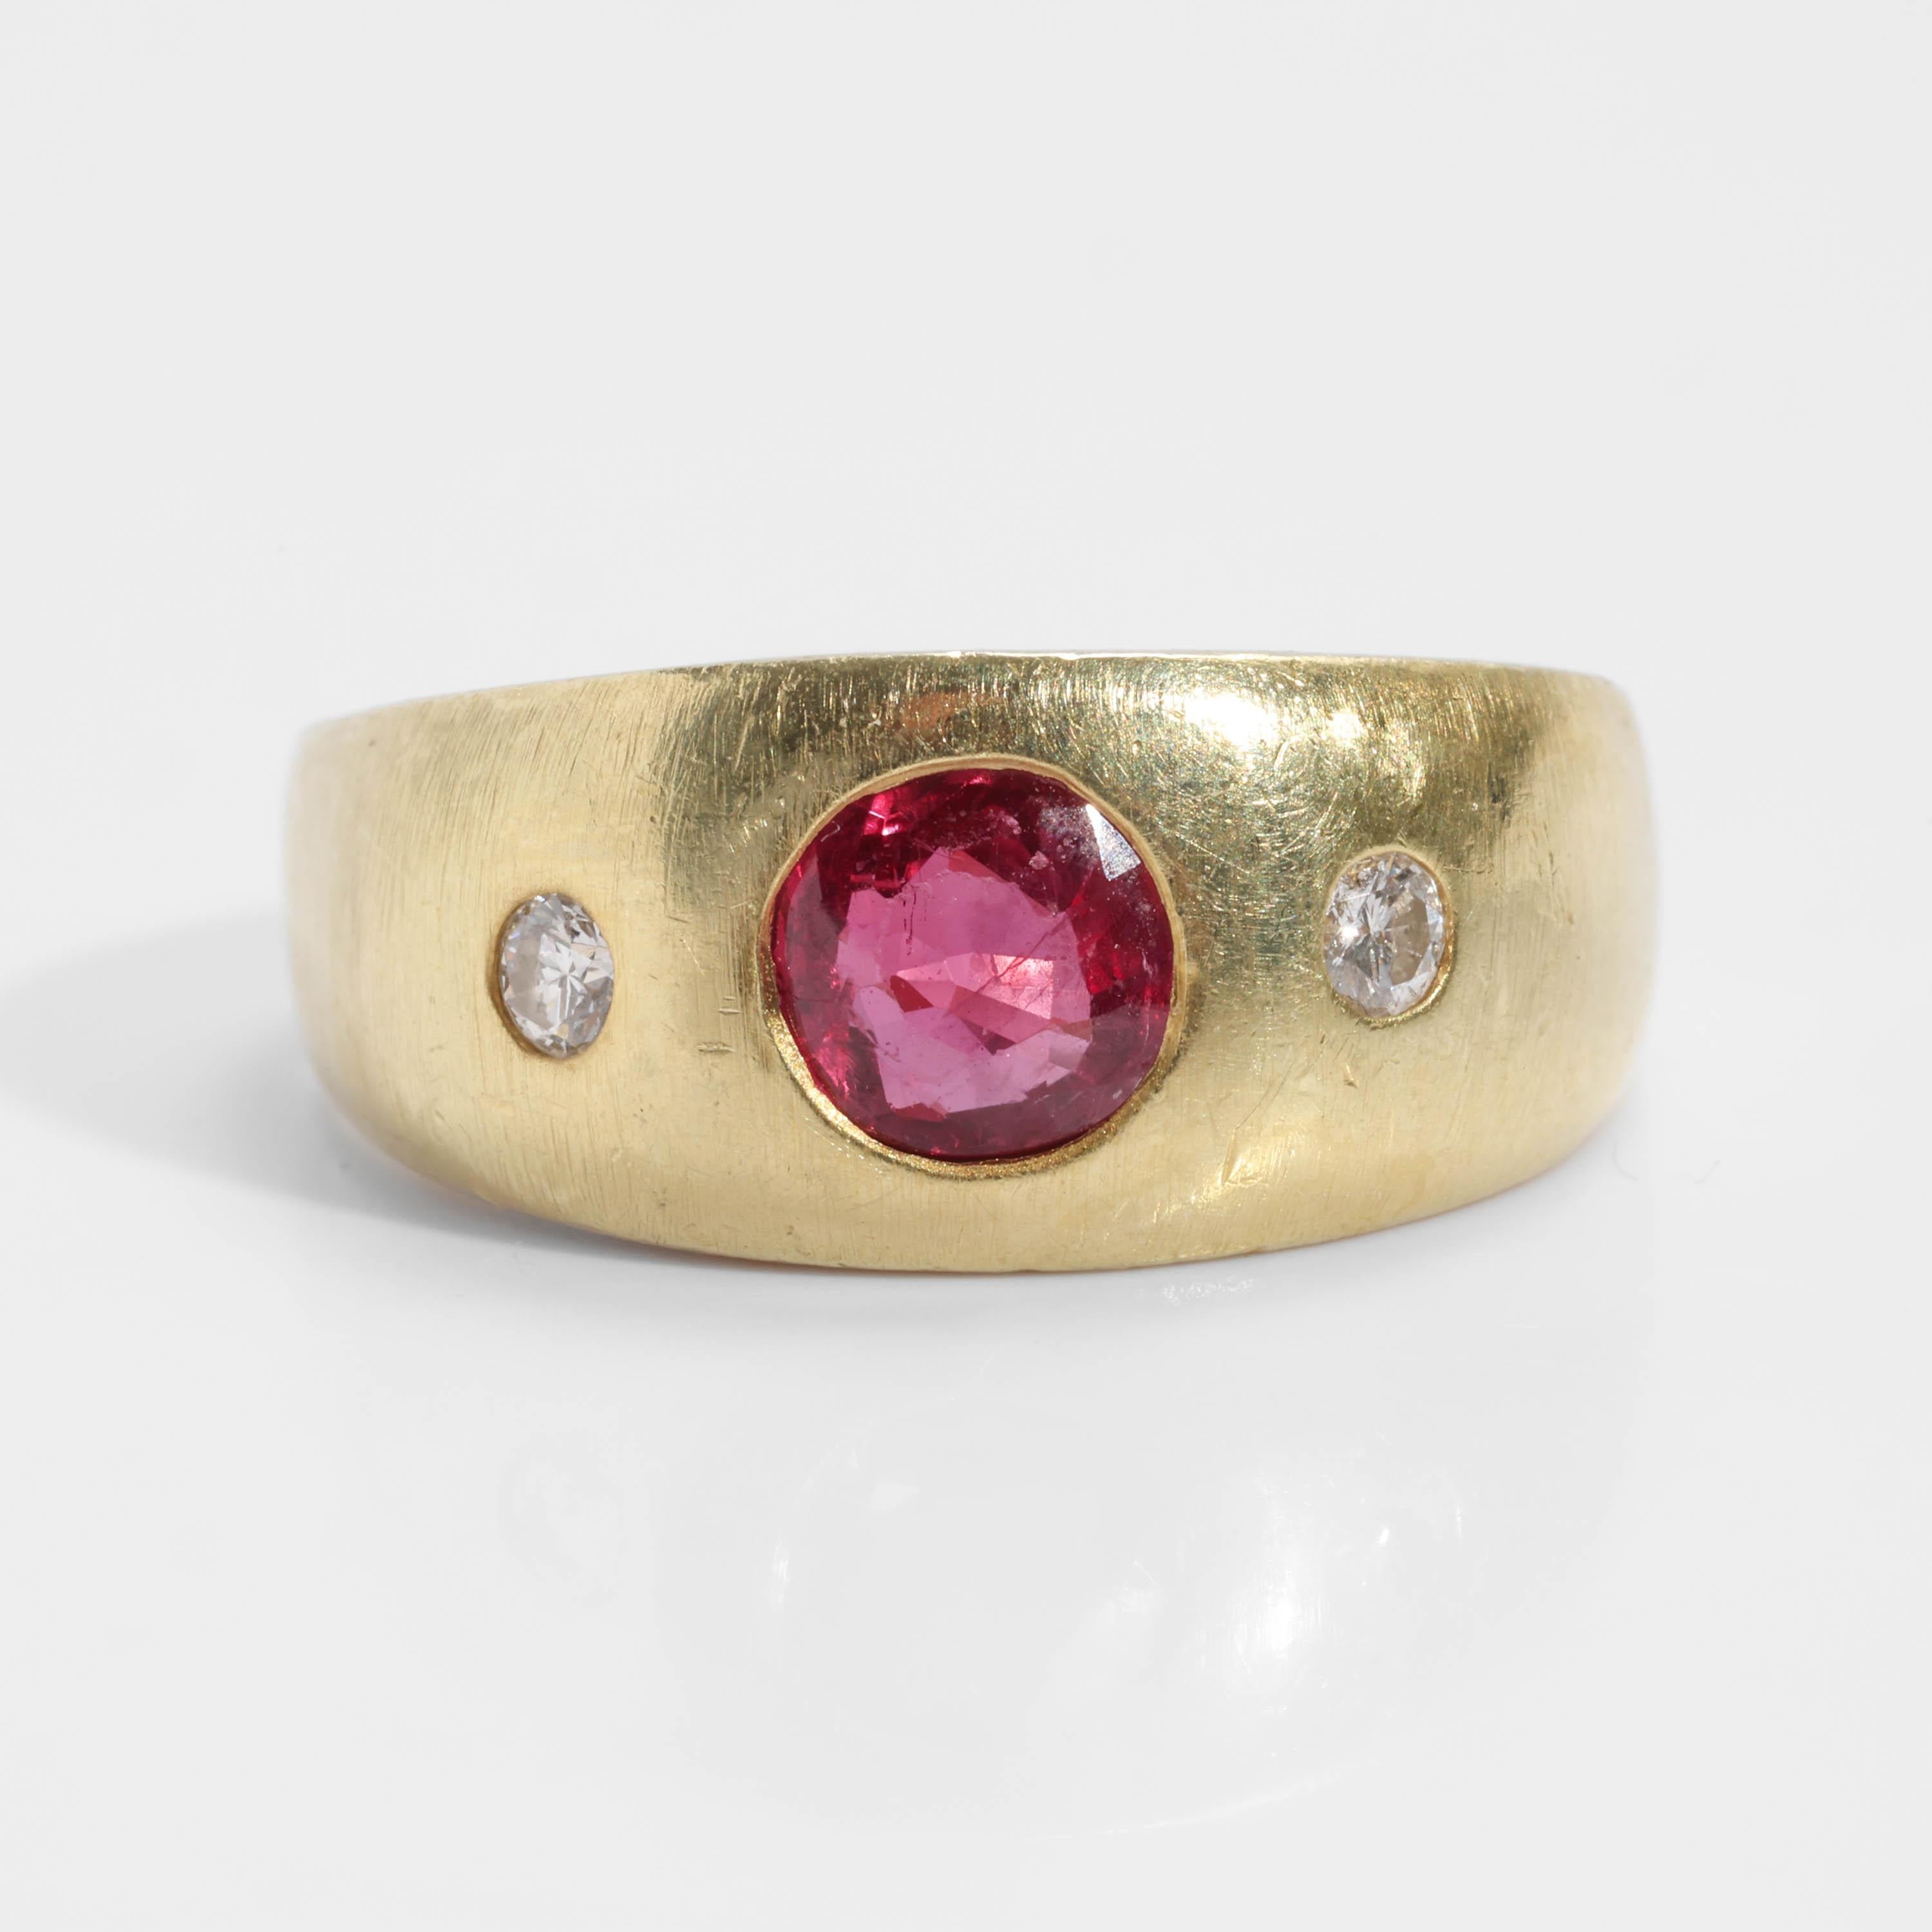 What a timeless and classic men's ruby and diamond ring! Dating to the 1950s, this sleek, buttery 14K yellow gold ring features a 5.7mm round faceted ruby that weighs .55 carats. The gorgeous red color is bright and open. On either side of the ruby,